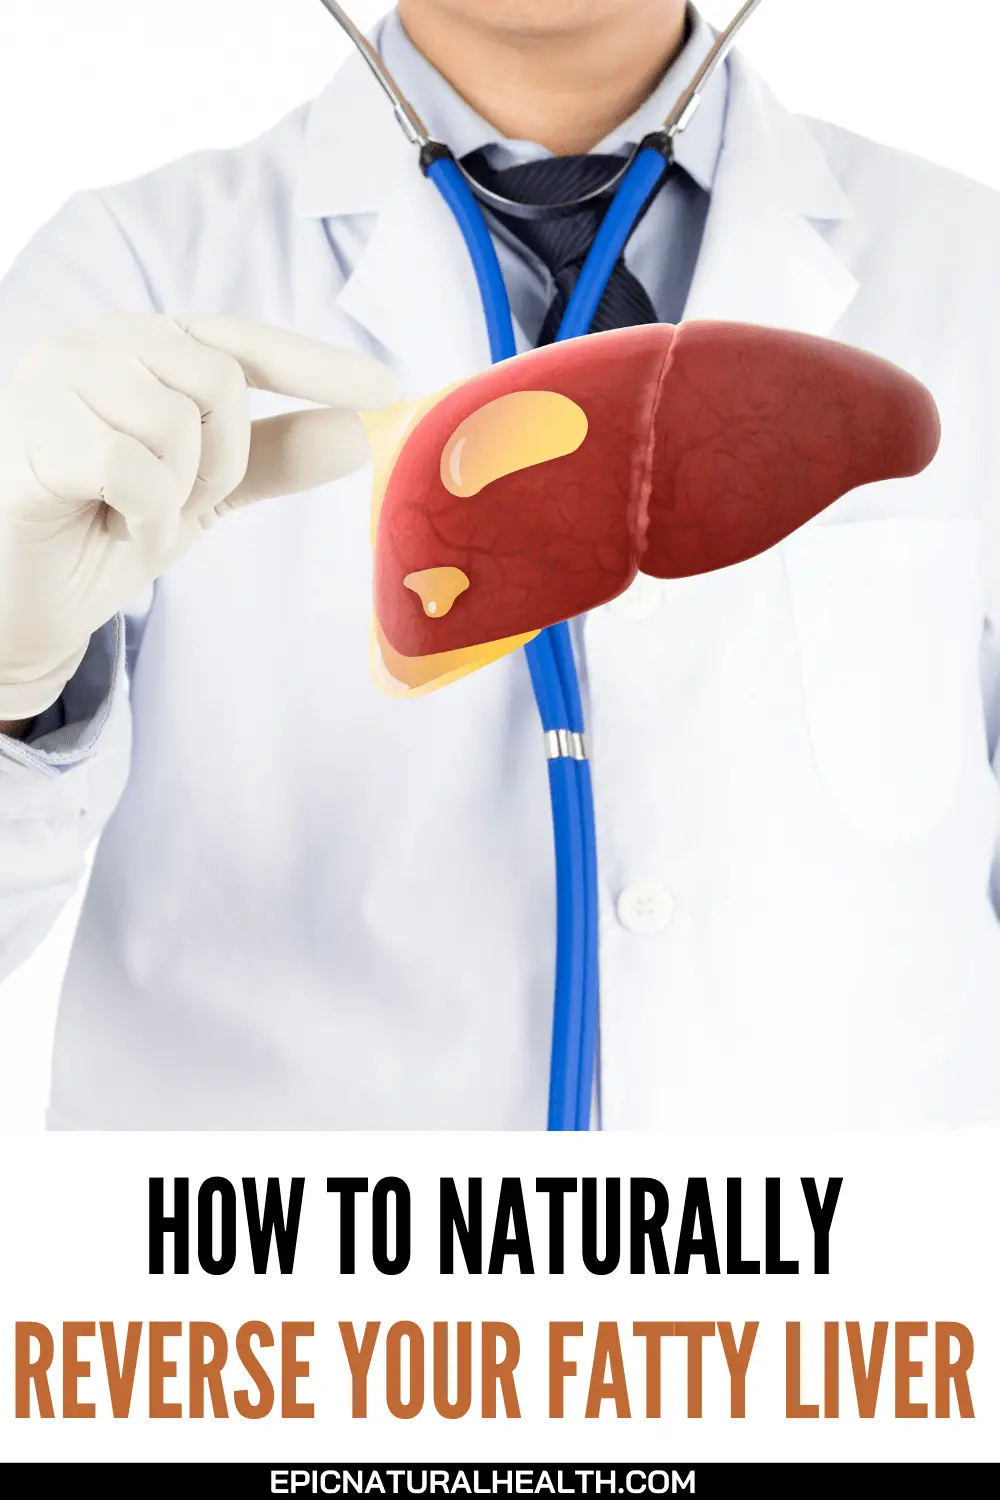 How to Naturally Reverse Your Fatty Liver